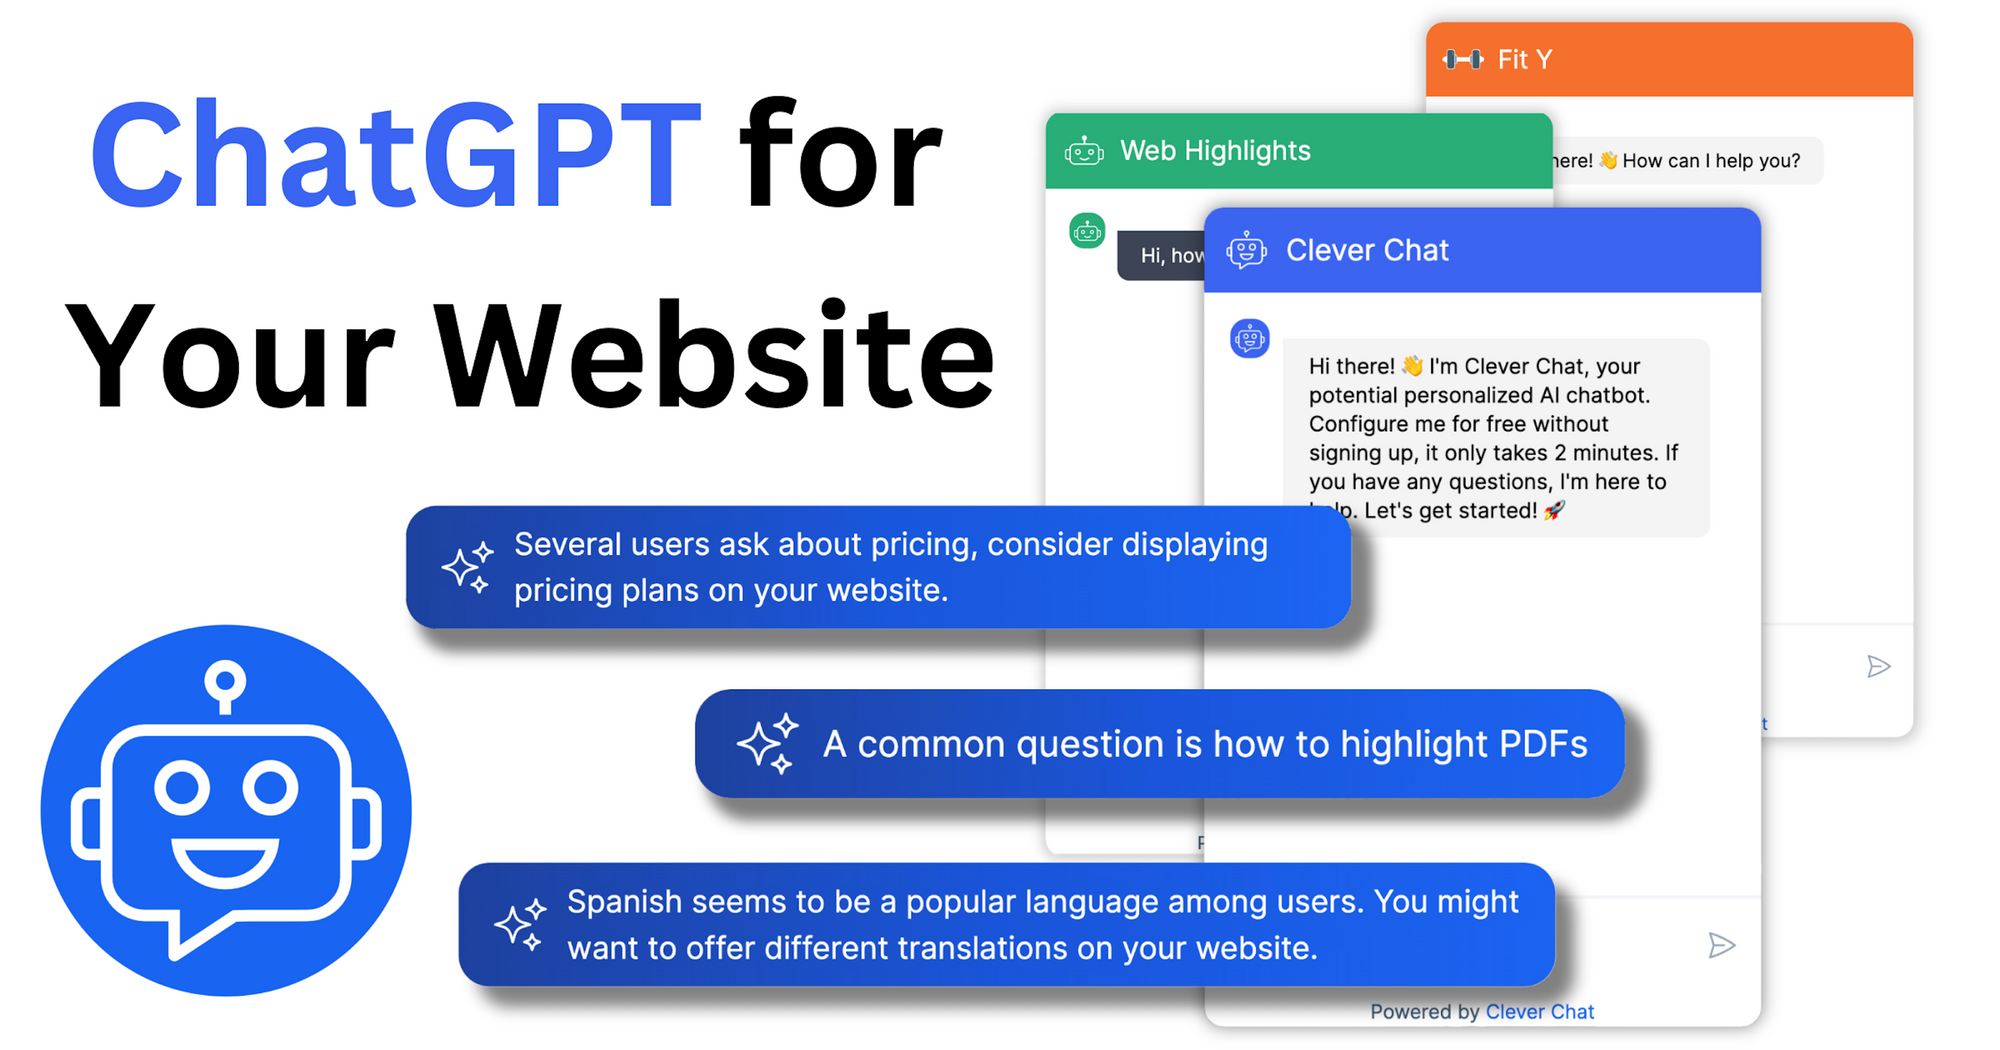 How To Add ChatGPT To Your Website in 2 Minutes